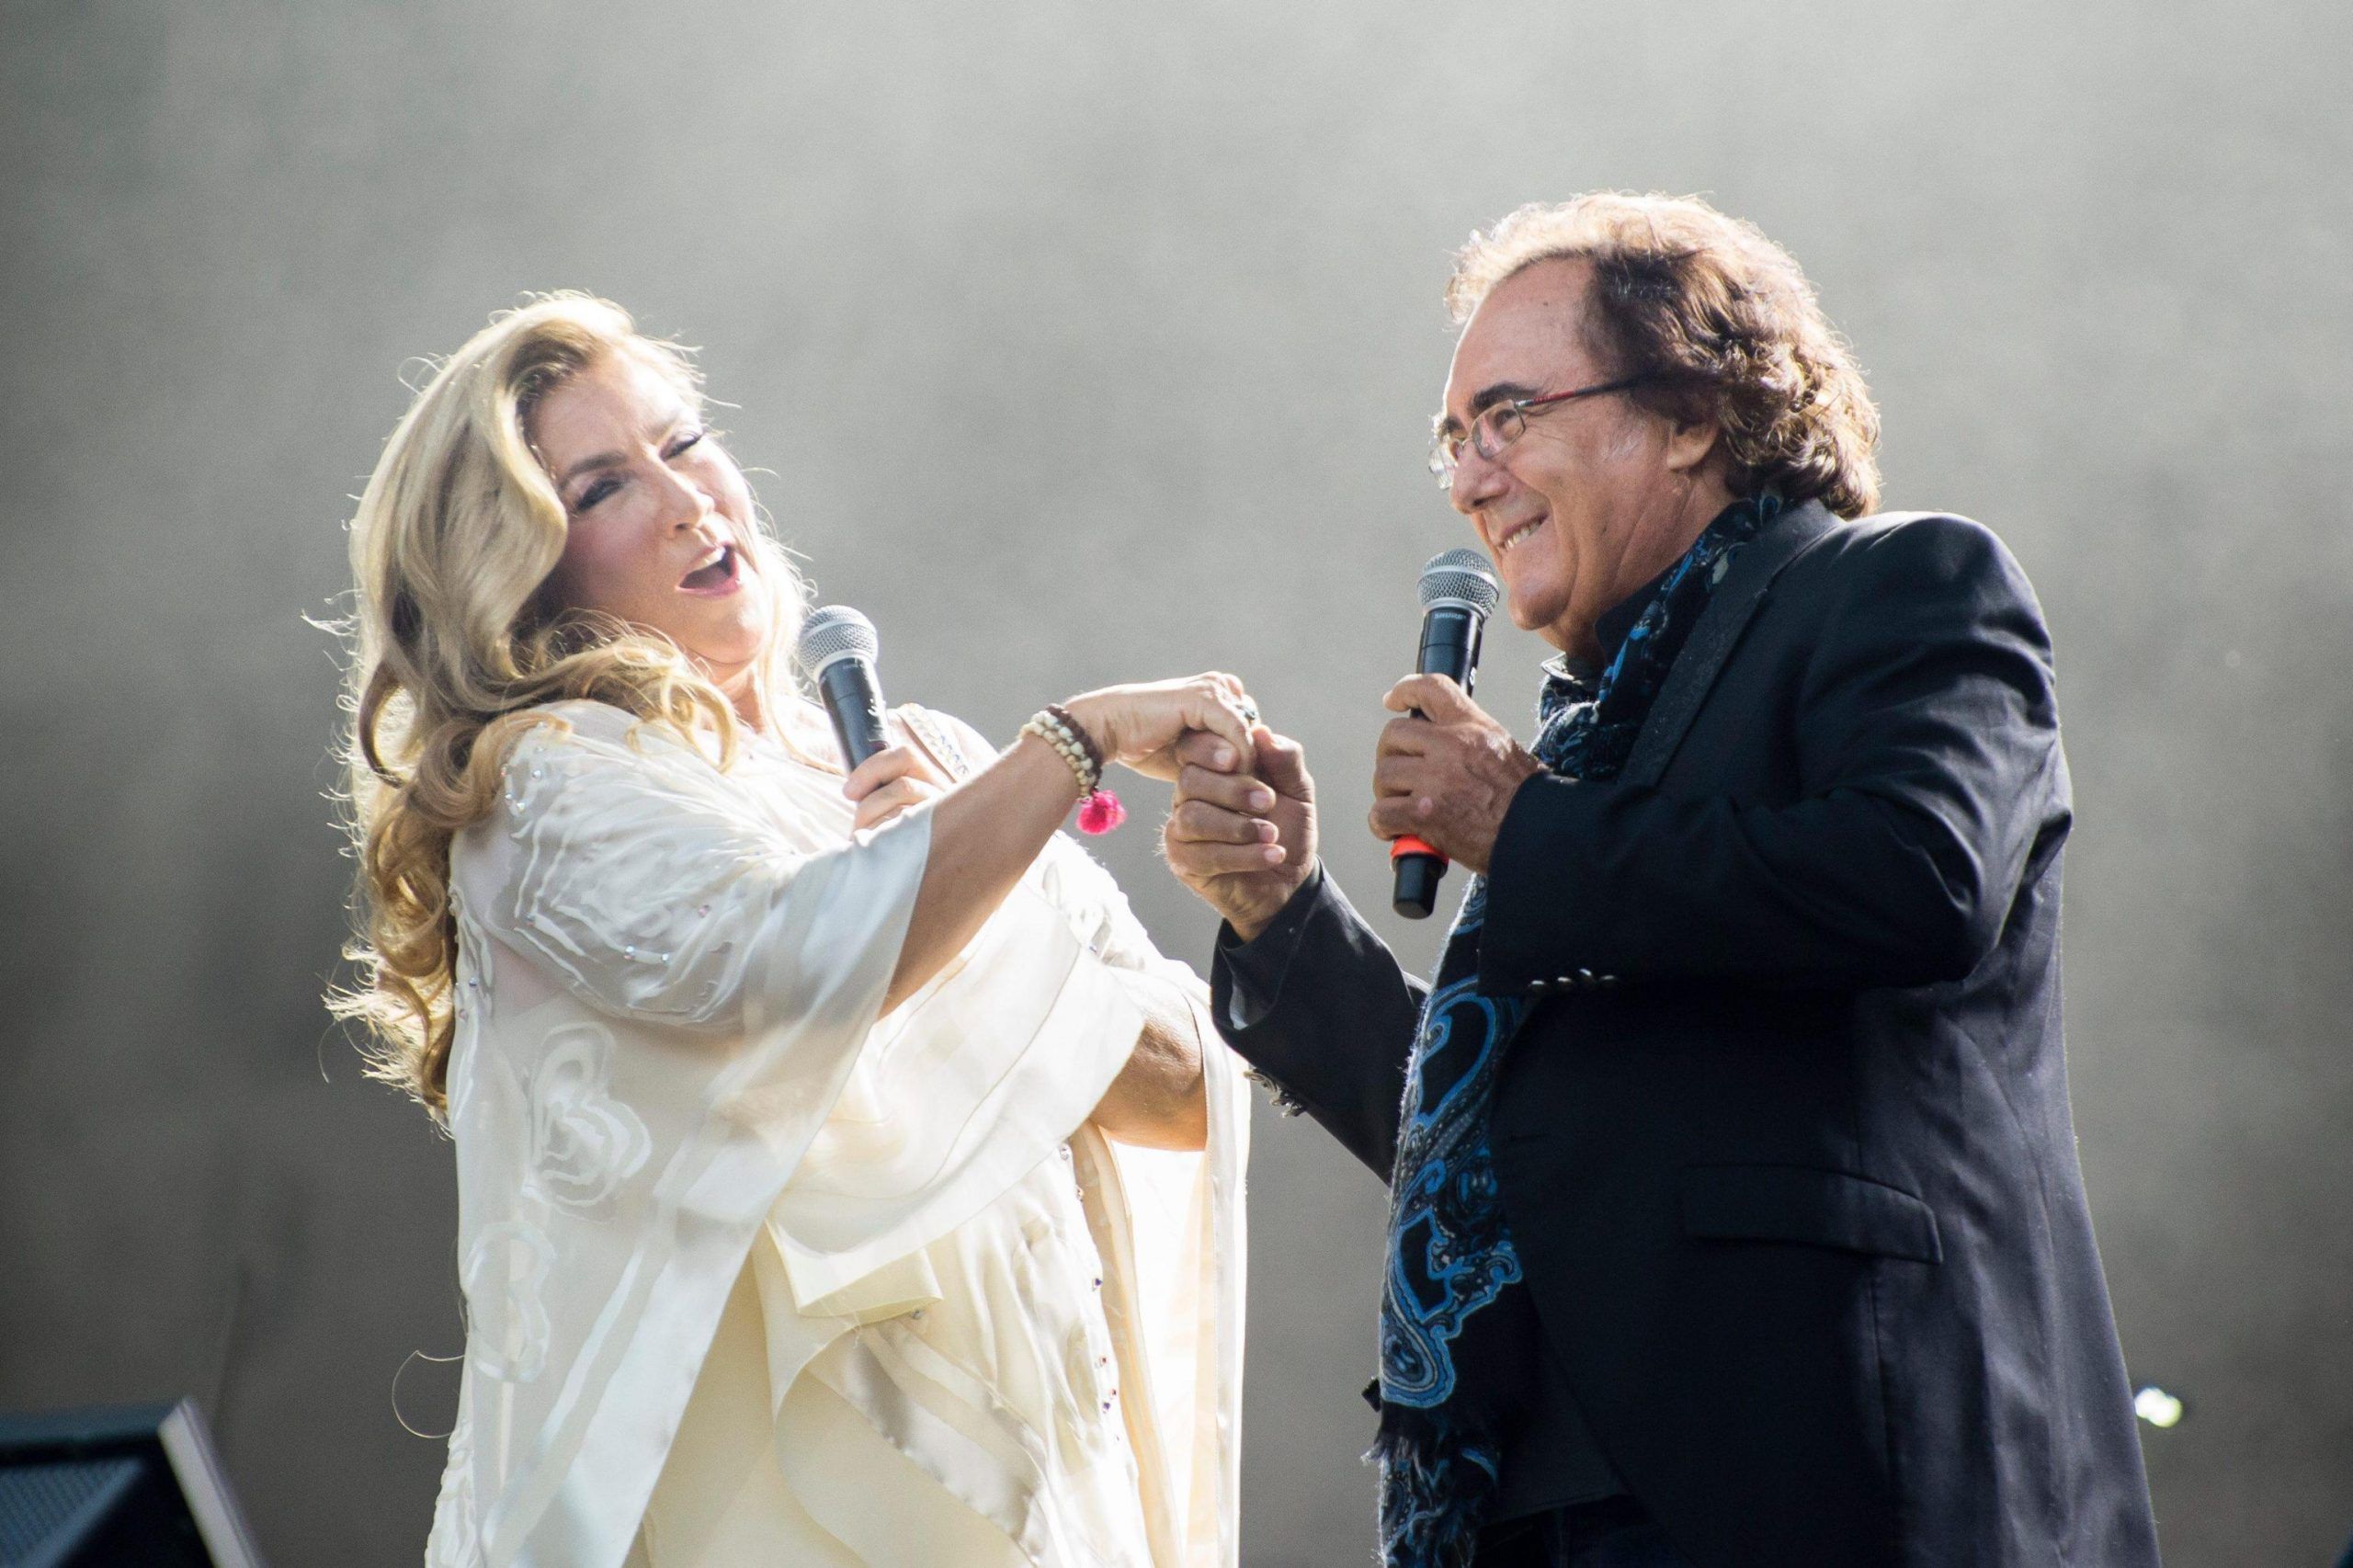 Germany Come back of Albano and Romina Power